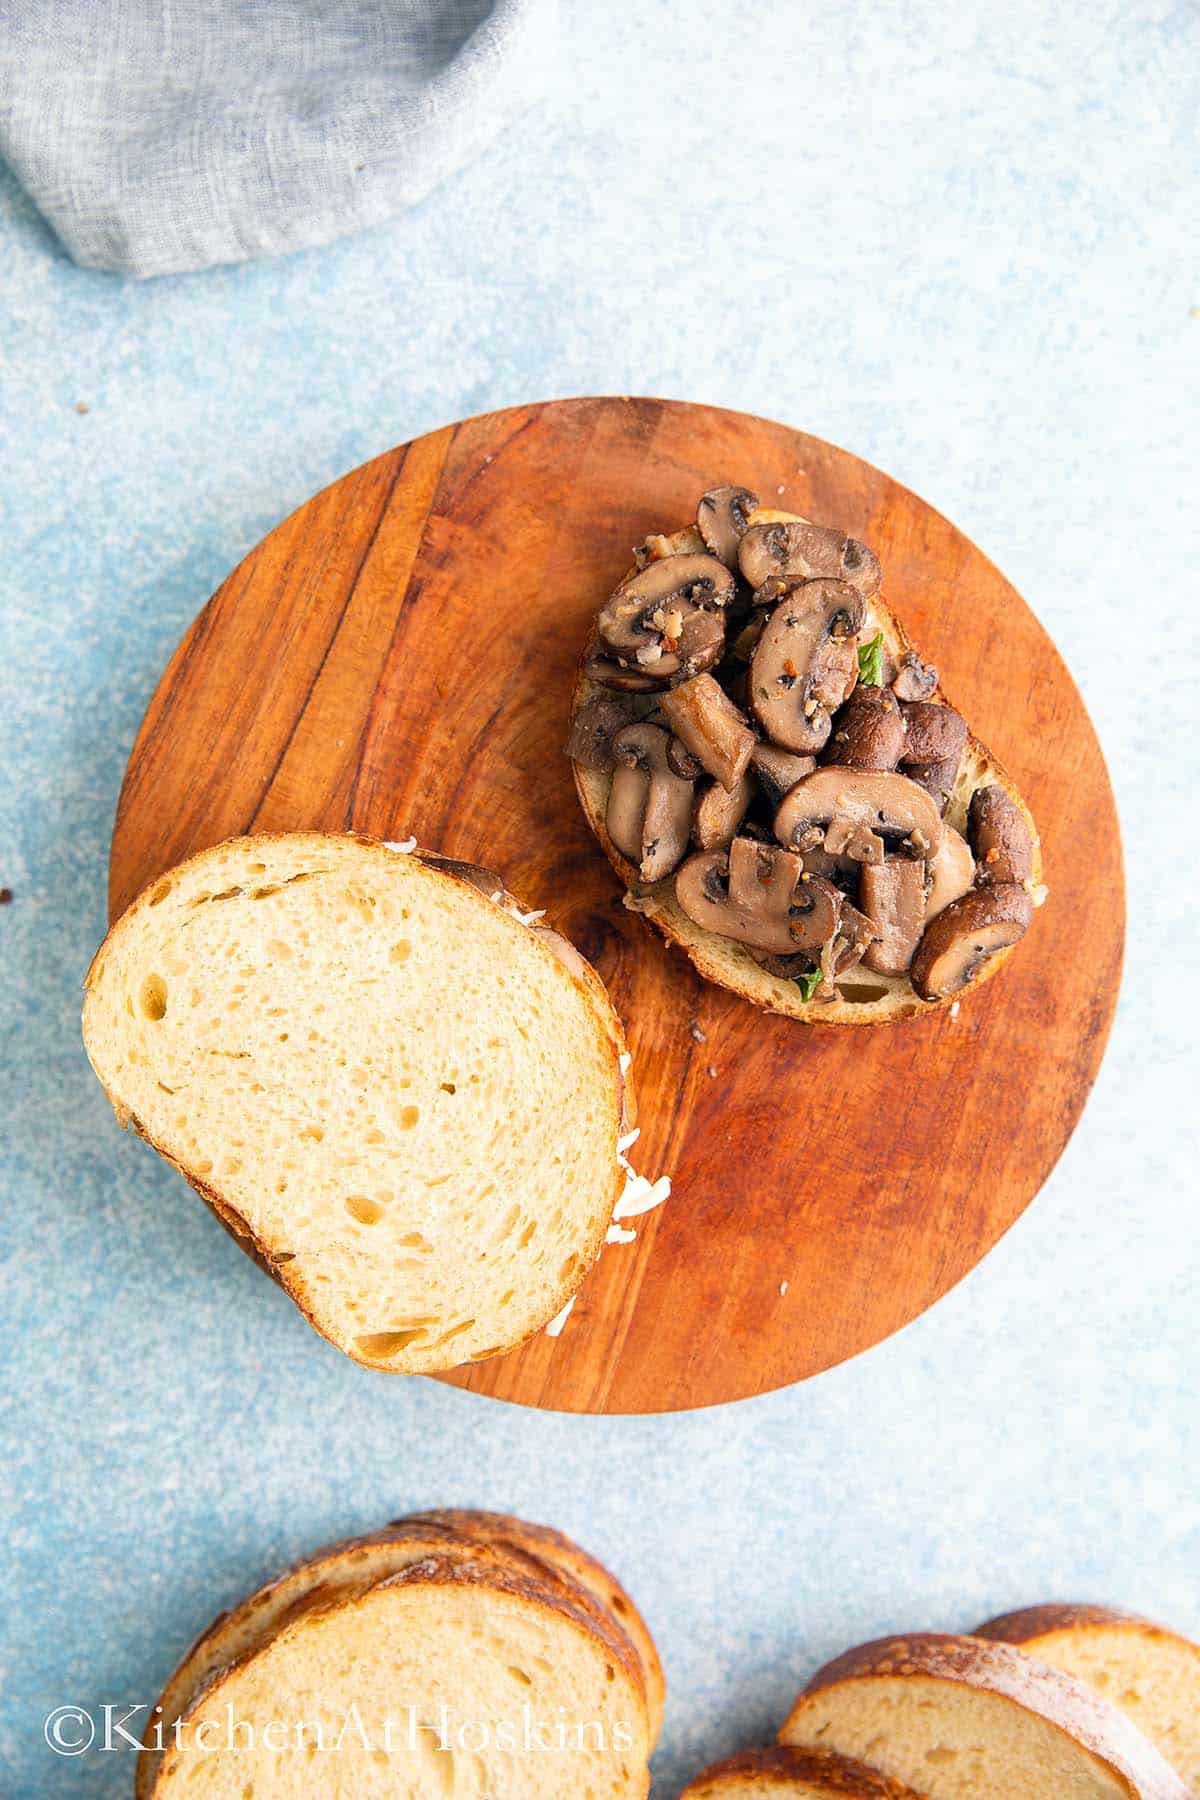 cooked sautéed mushrooms placed on a bread to build a sandwich.